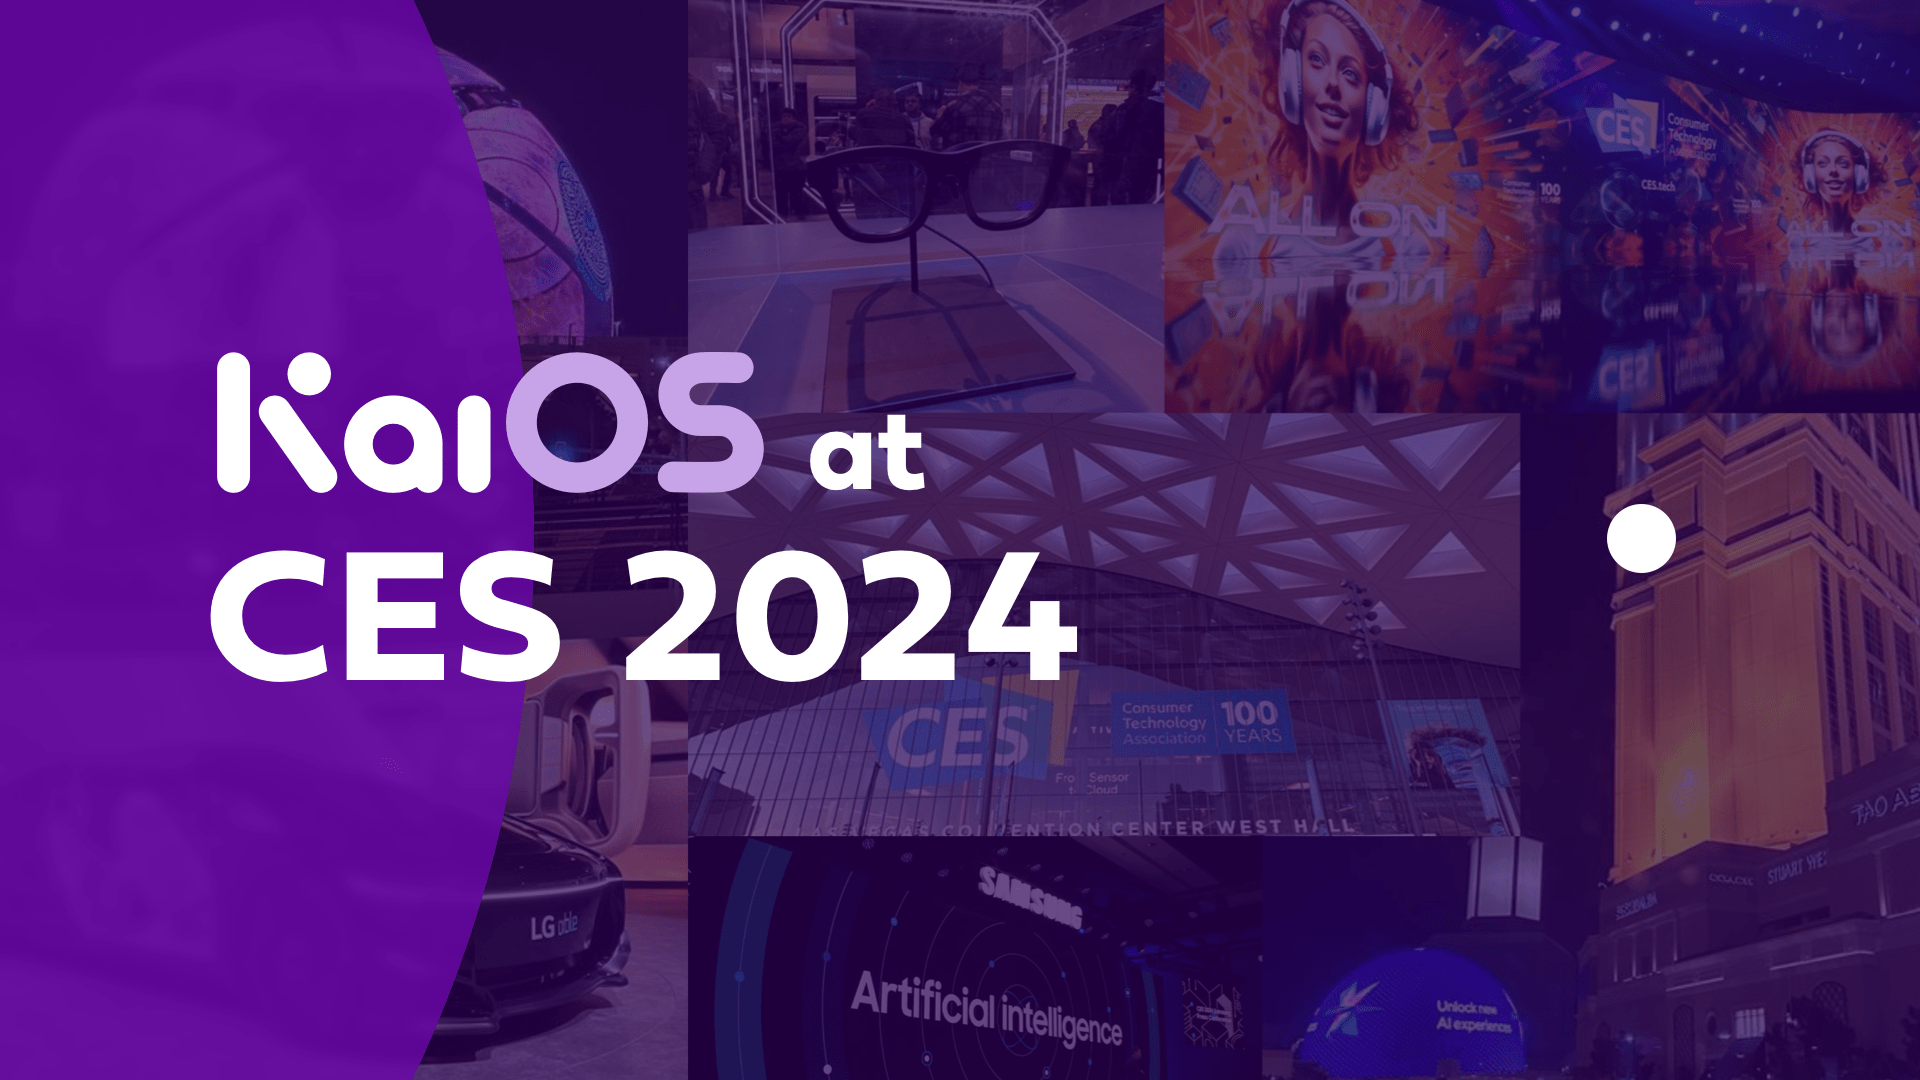 KaiOS discusses the future of Smart Feature Phones with 5G at the CES® tech event 2024!